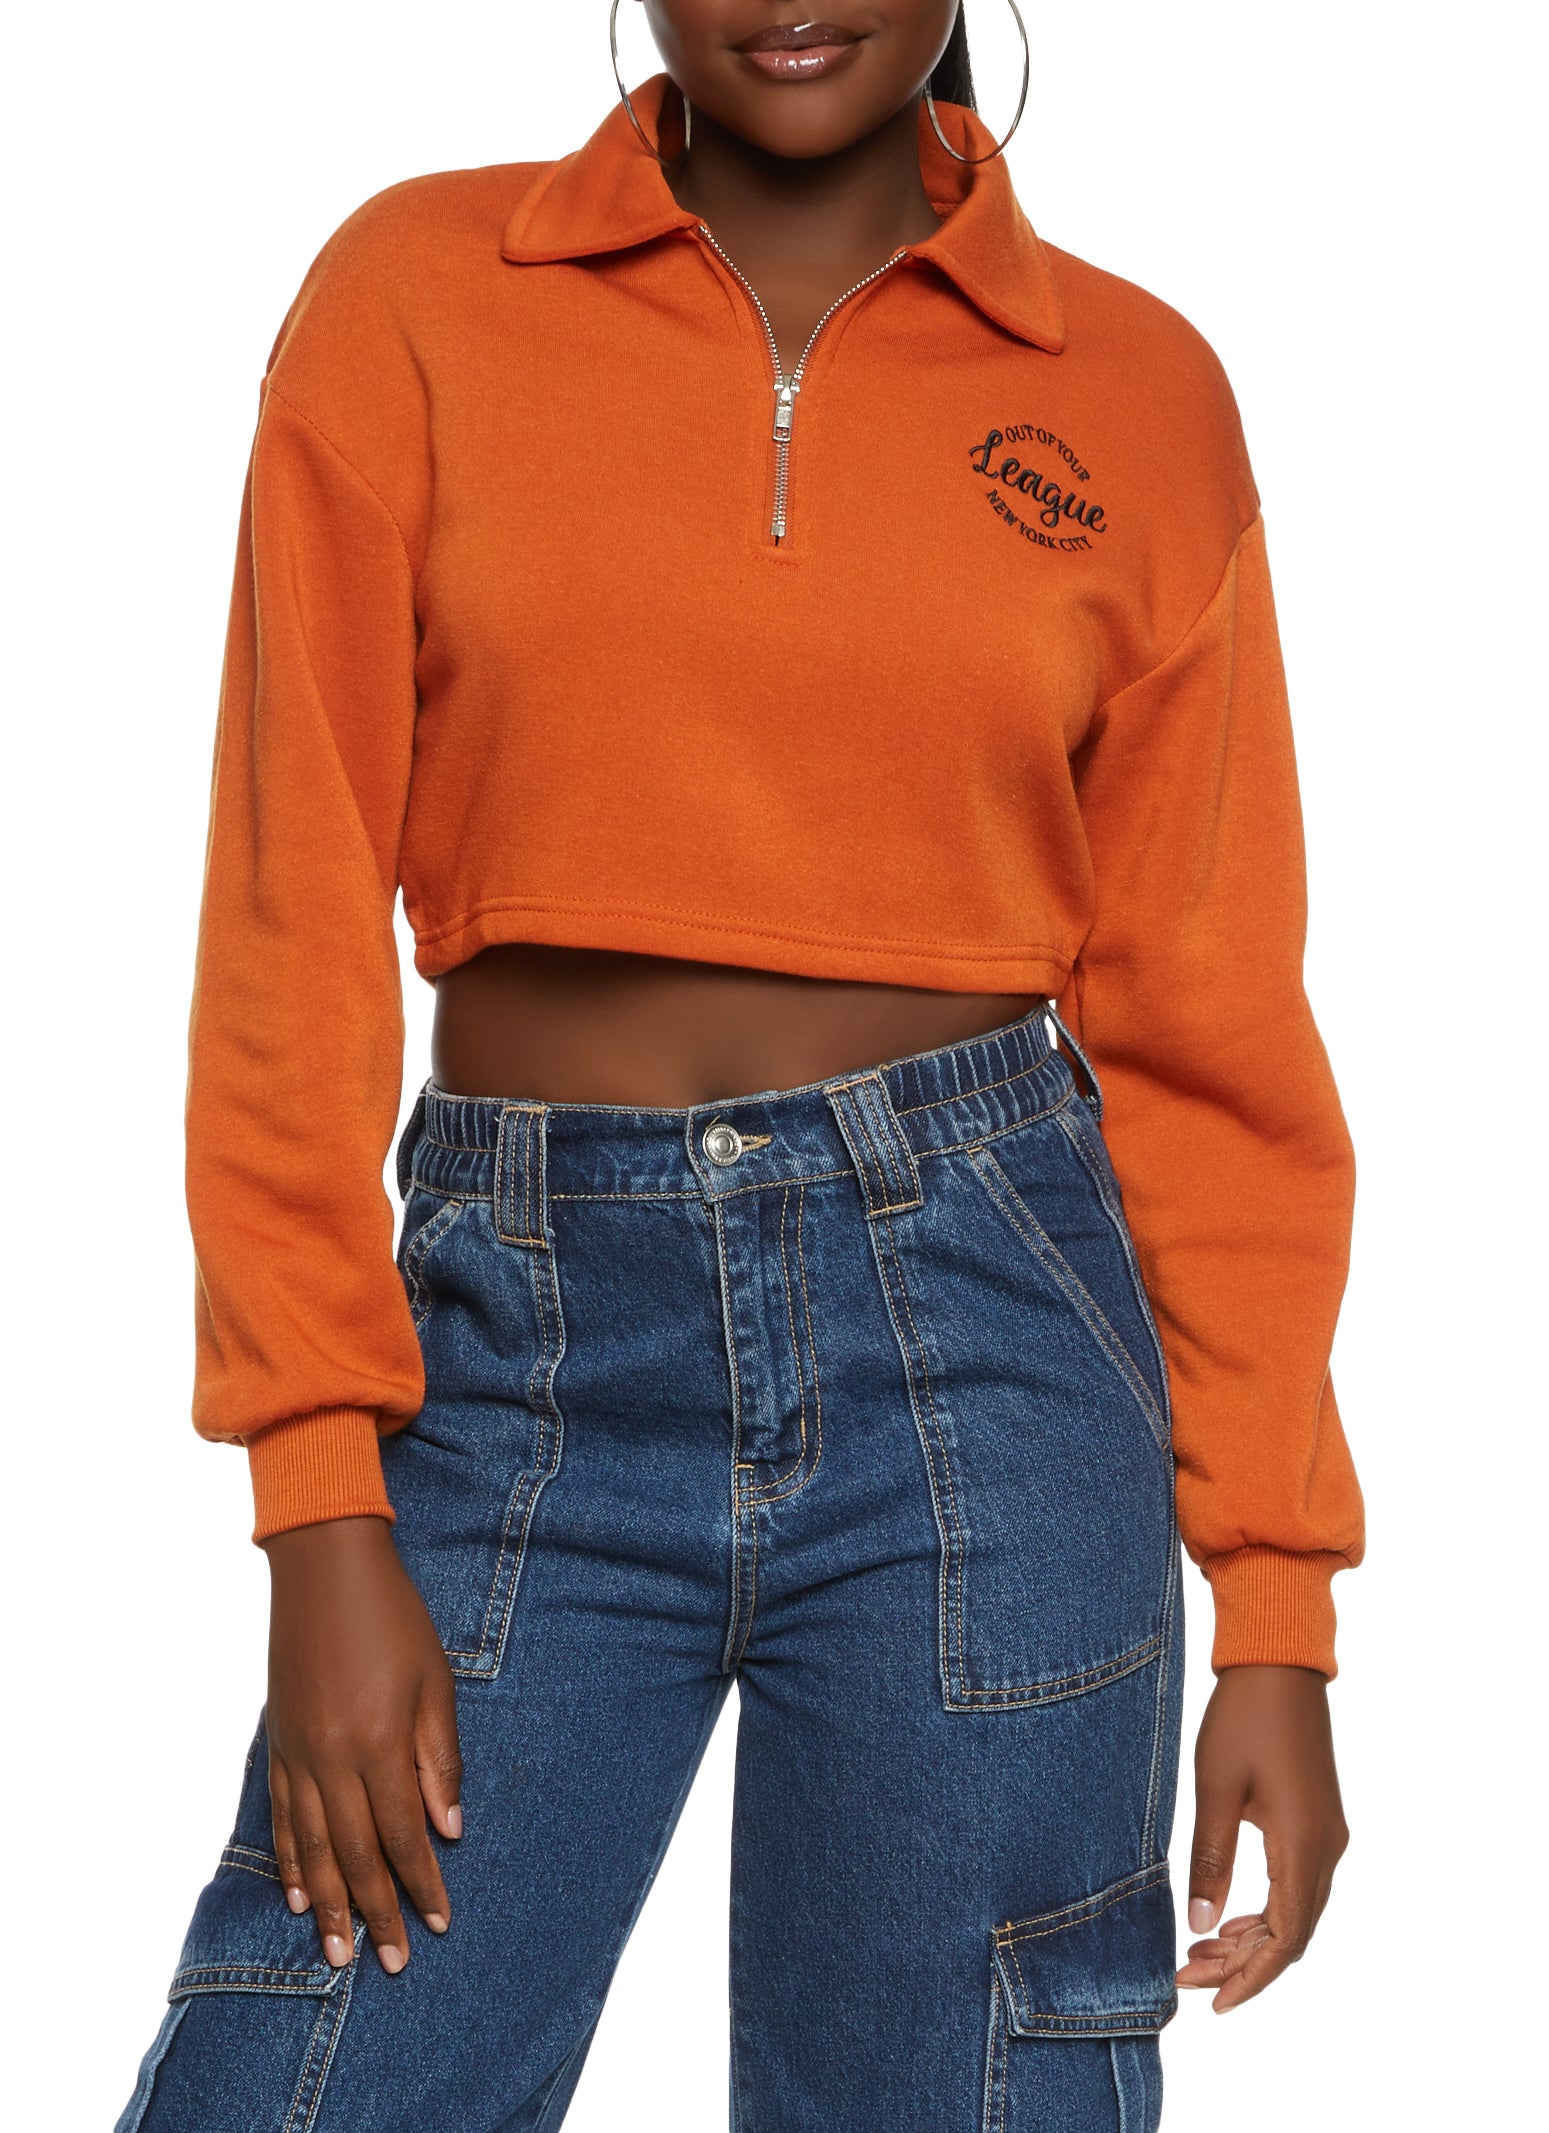 Out of Your League Embroidered Half Zip Cropped Sweatshirt